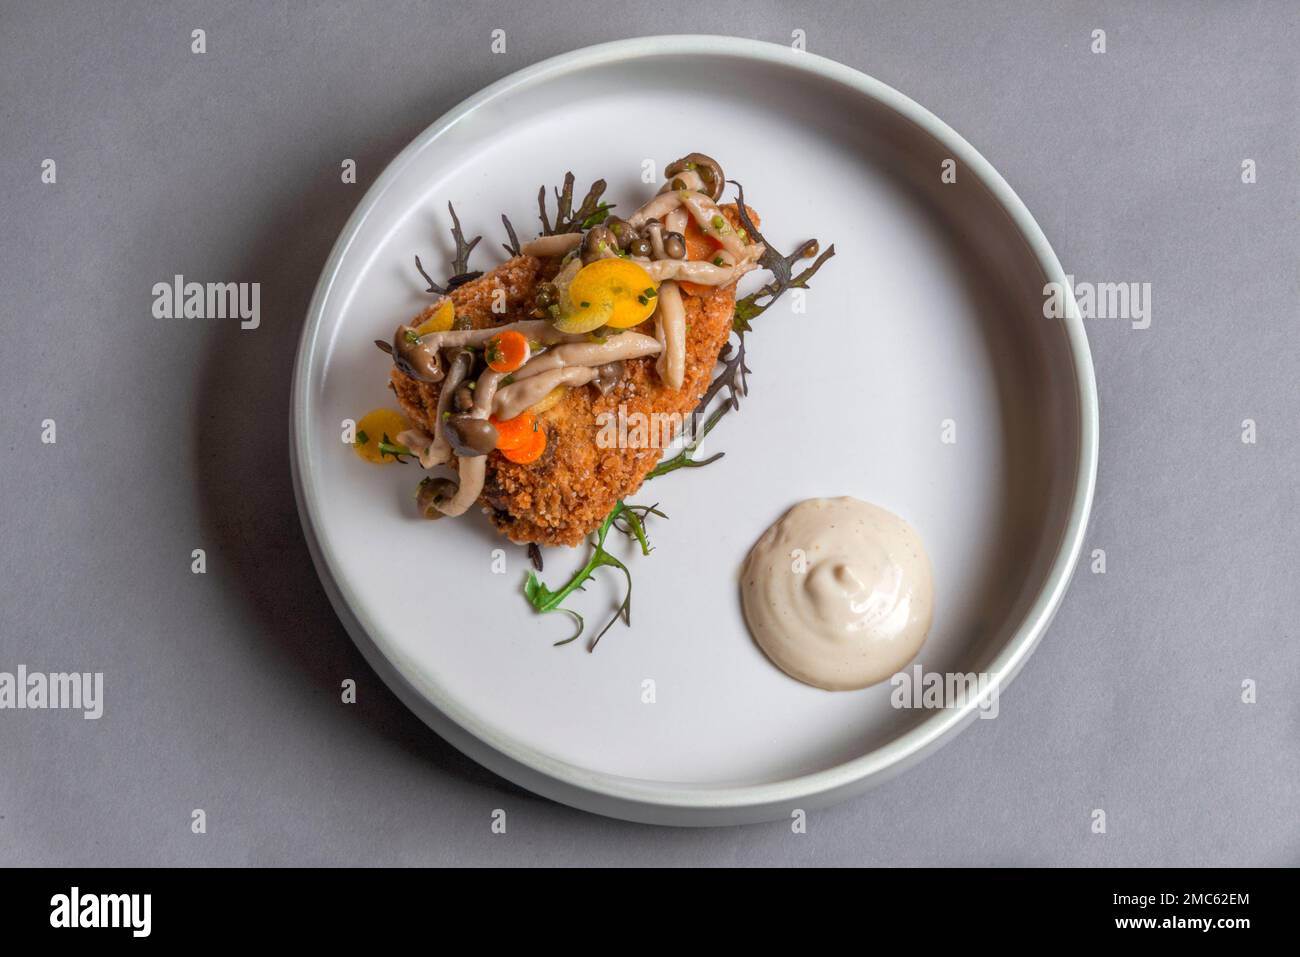 A Birdseye view of a modern plated meal, shot against a plain grey background. Stock Photo